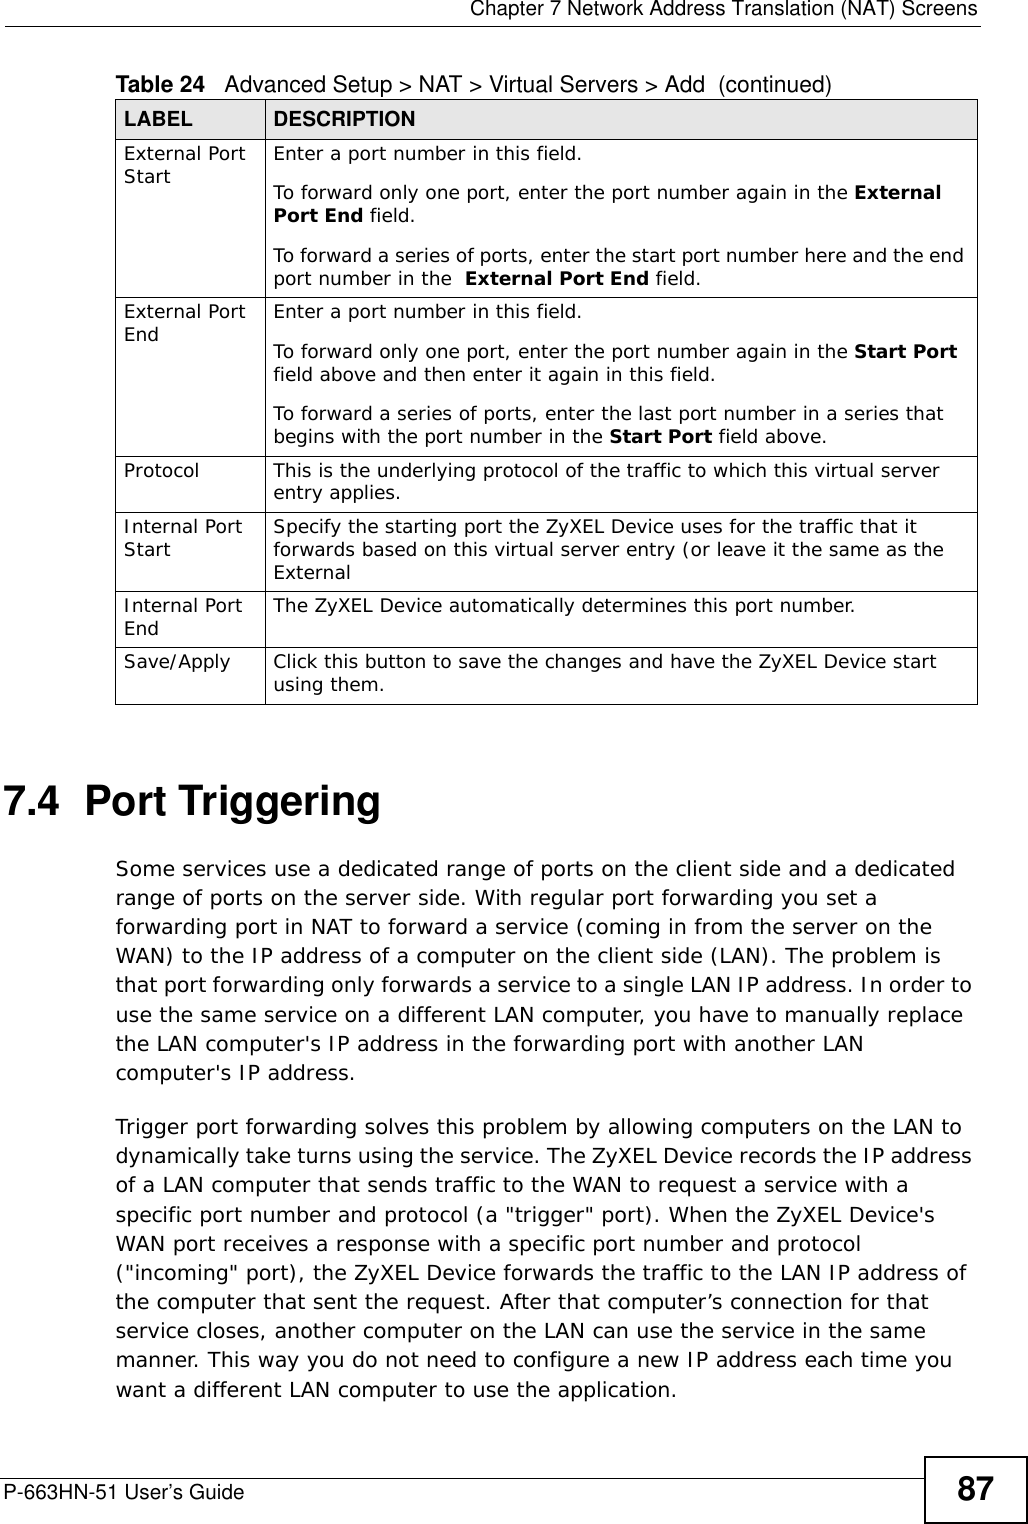  Chapter 7 Network Address Translation (NAT) ScreensP-663HN-51 User’s Guide 877.4  Port Triggering   Some services use a dedicated range of ports on the client side and a dedicated range of ports on the server side. With regular port forwarding you set a forwarding port in NAT to forward a service (coming in from the server on the WAN) to the IP address of a computer on the client side (LAN). The problem is that port forwarding only forwards a service to a single LAN IP address. In order to use the same service on a different LAN computer, you have to manually replace the LAN computer&apos;s IP address in the forwarding port with another LAN computer&apos;s IP address. Trigger port forwarding solves this problem by allowing computers on the LAN to dynamically take turns using the service. The ZyXEL Device records the IP address of a LAN computer that sends traffic to the WAN to request a service with a specific port number and protocol (a &quot;trigger&quot; port). When the ZyXEL Device&apos;s WAN port receives a response with a specific port number and protocol (&quot;incoming&quot; port), the ZyXEL Device forwards the traffic to the LAN IP address of the computer that sent the request. After that computer’s connection for that service closes, another computer on the LAN can use the service in the same manner. This way you do not need to configure a new IP address each time you want a different LAN computer to use the application.External Port Start Enter a port number in this field. To forward only one port, enter the port number again in the External Port End field. To forward a series of ports, enter the start port number here and the end port number in the  External Port End field.External Port End Enter a port number in this field. To forward only one port, enter the port number again in the Start Port field above and then enter it again in this field. To forward a series of ports, enter the last port number in a series that begins with the port number in the Start Port field above.Protocol This is the underlying protocol of the traffic to which this virtual server entry applies.Internal Port Start Specify the starting port the ZyXEL Device uses for the traffic that it forwards based on this virtual server entry (or leave it the same as the External Internal Port End The ZyXEL Device automatically determines this port number.Save/Apply Click this button to save the changes and have the ZyXEL Device start using them.Table 24   Advanced Setup &gt; NAT &gt; Virtual Servers &gt; Add  (continued)LABEL DESCRIPTION